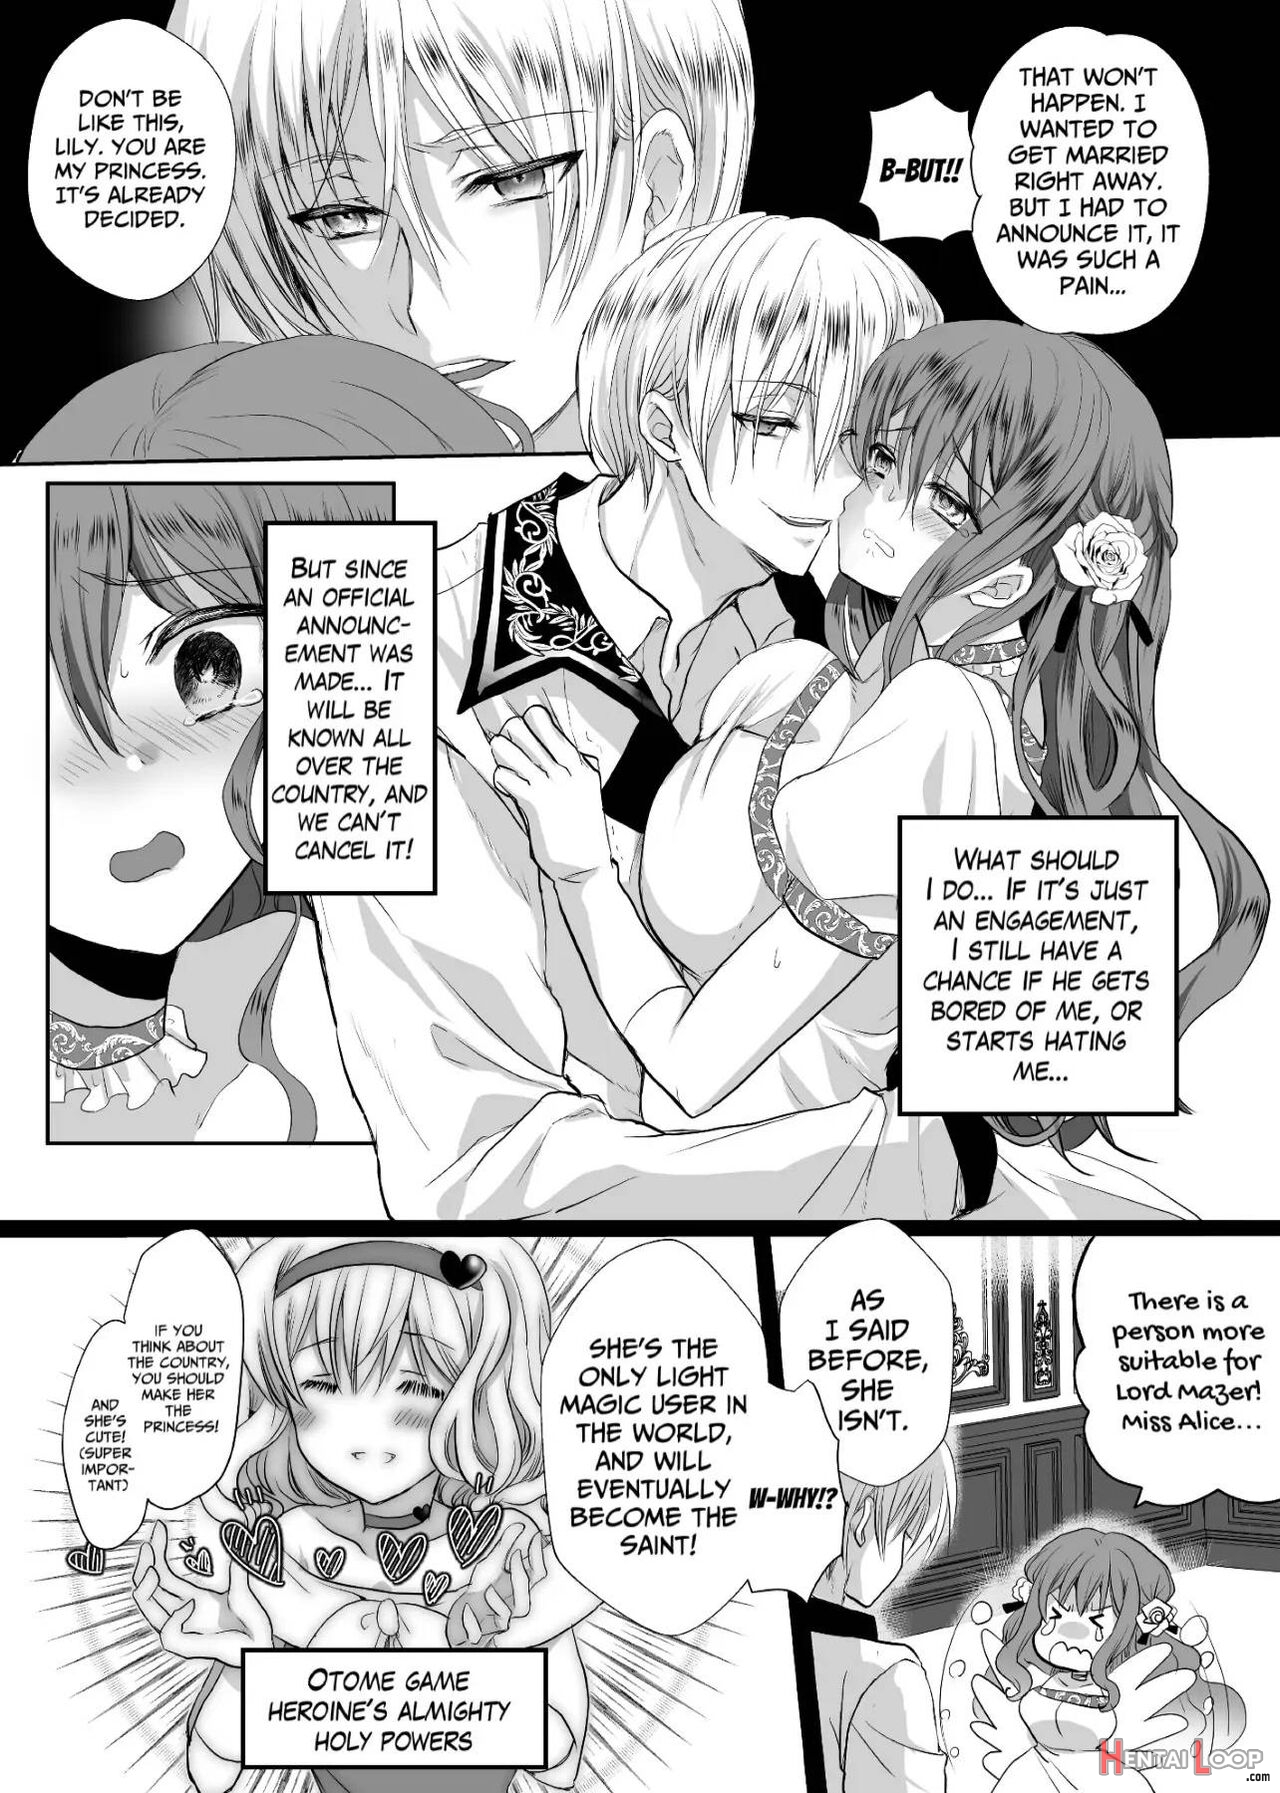  jk's Tragic Isekai Reincarnation As The Villainess ~but My Precious Side Character!~ 2 page 5